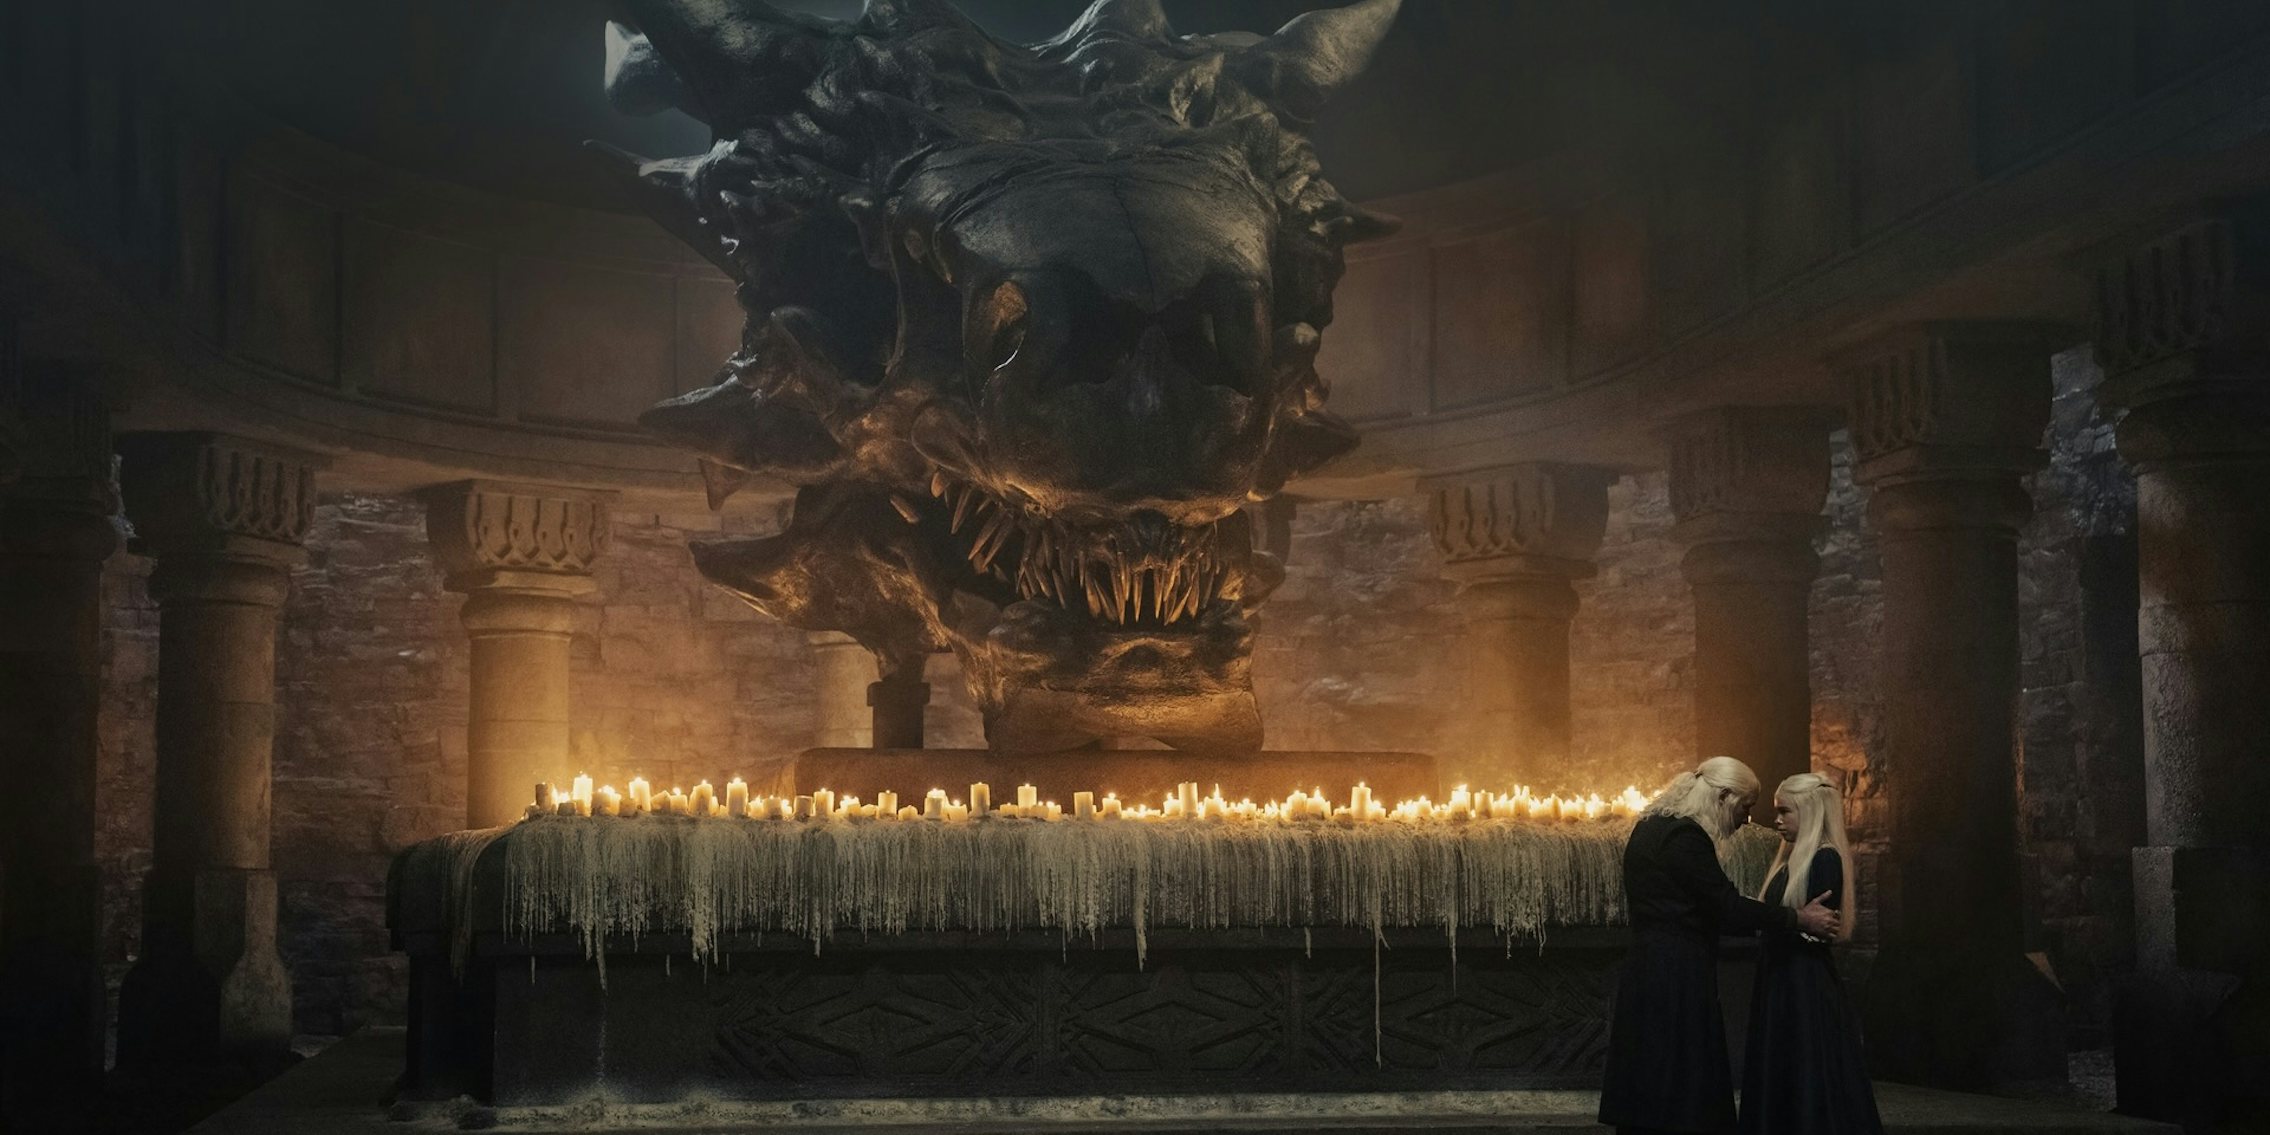 viserys (left) and rhaenyra (right) stand near balerion's skull in house of the dragon